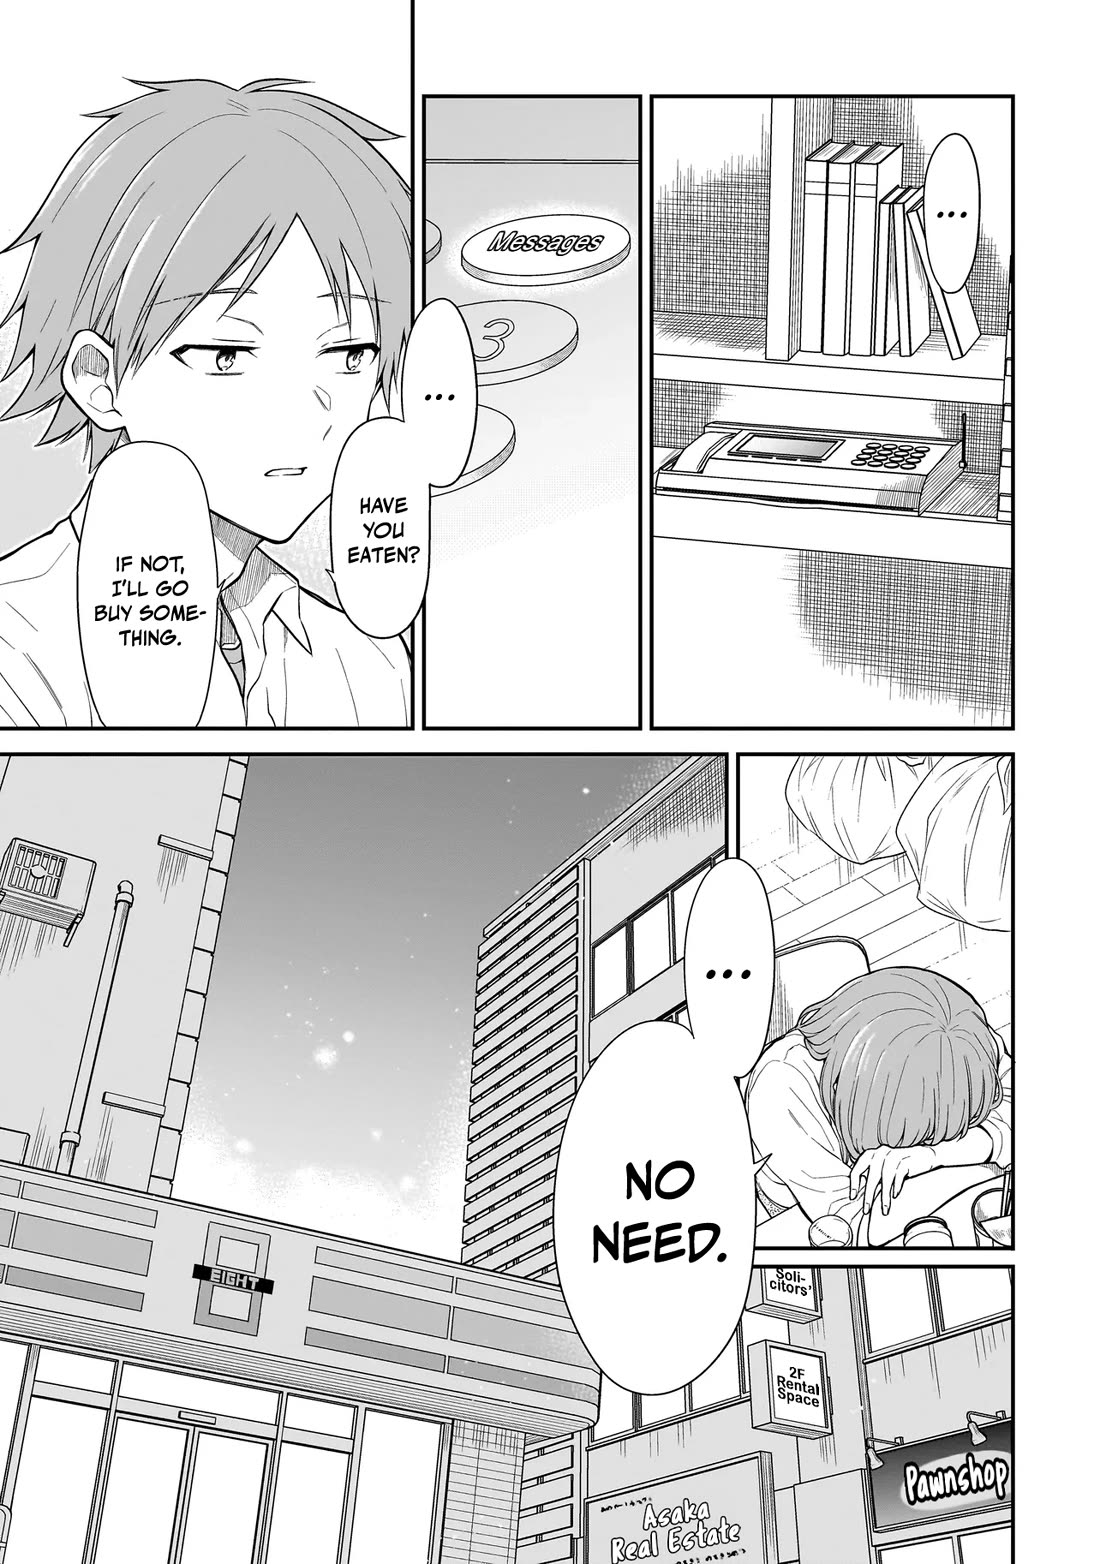 Miyu-chan Will Always Be Your Friend - chapter 3 - #6